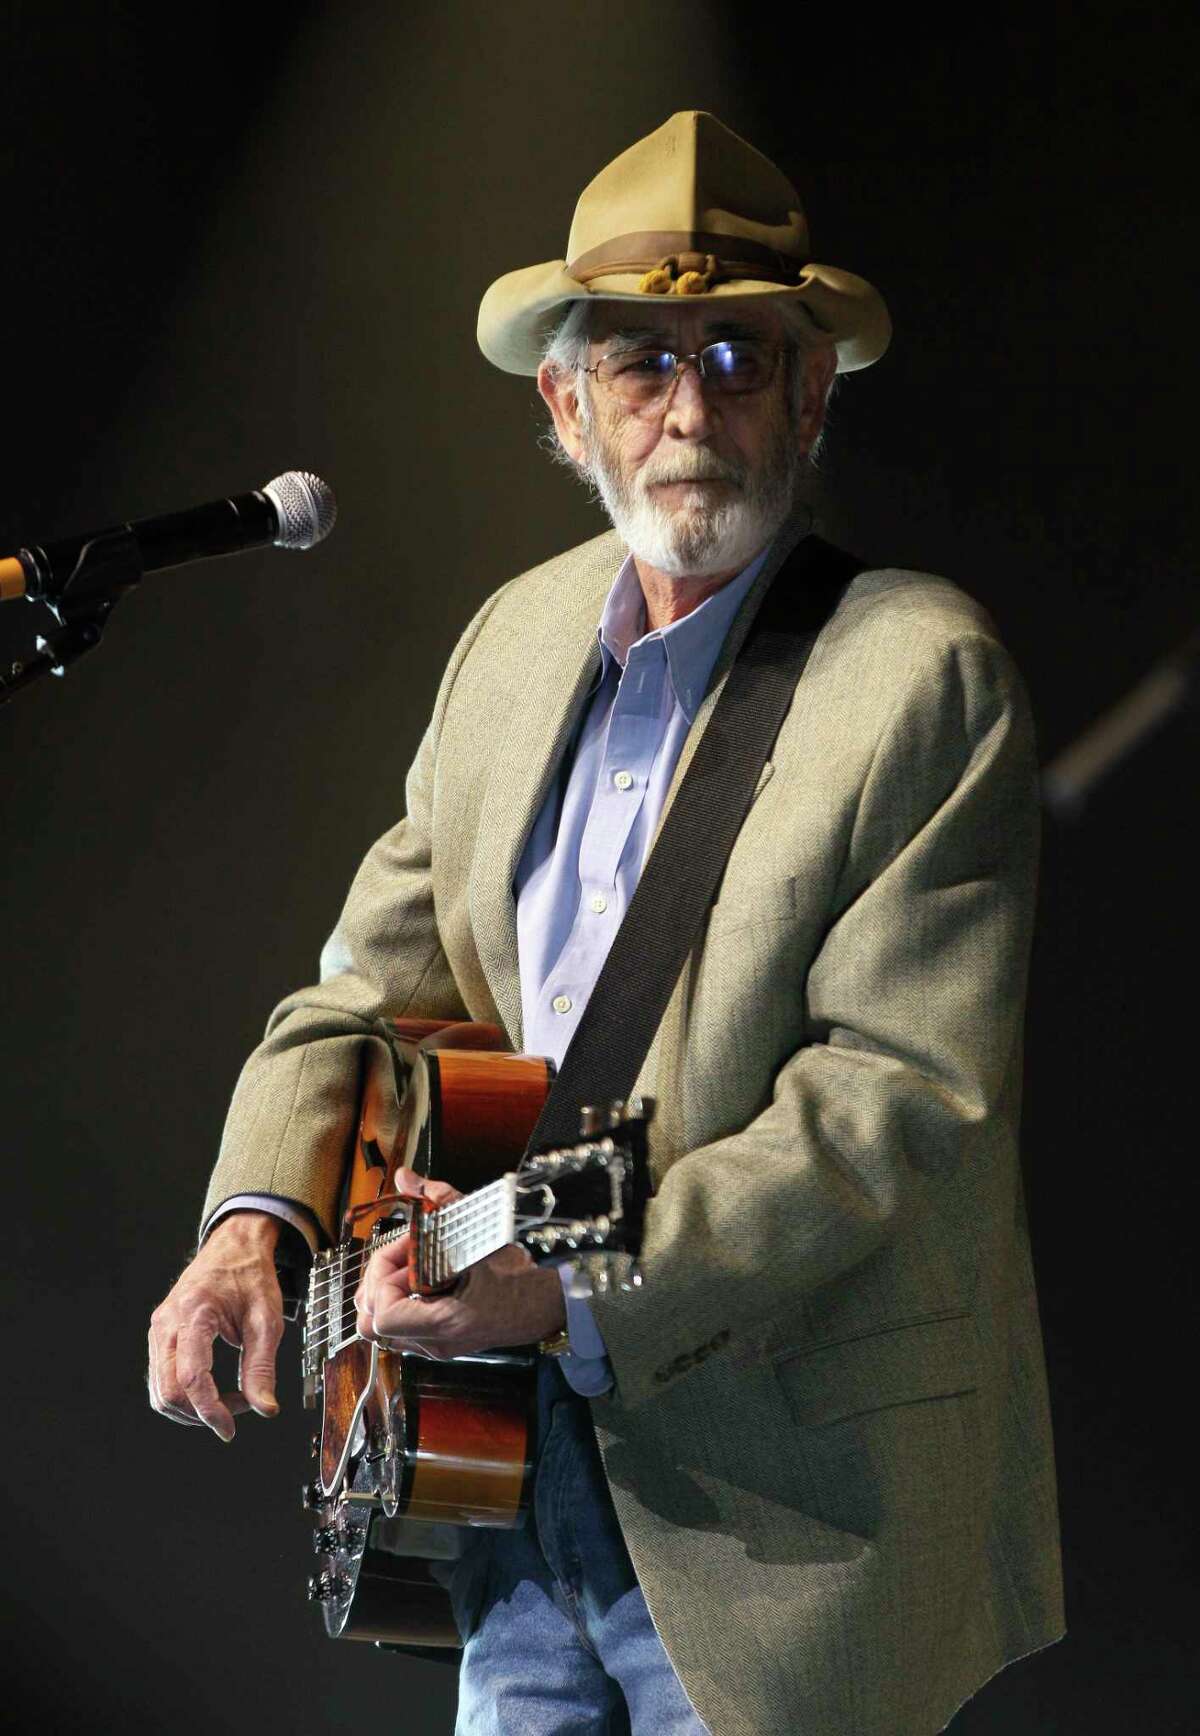 FILE - In this April 10, 2012 file photo, Don Williams performs during the All for the Hall concert in Nashville, Tenn. Williams, an award-winning country singer with love ballads like "I Believe in You," died Friday, Sept. 8, 2017, after a short illness. He was 78. (AP Photo/Mark Humphrey, File) ORG XMIT: NYET562